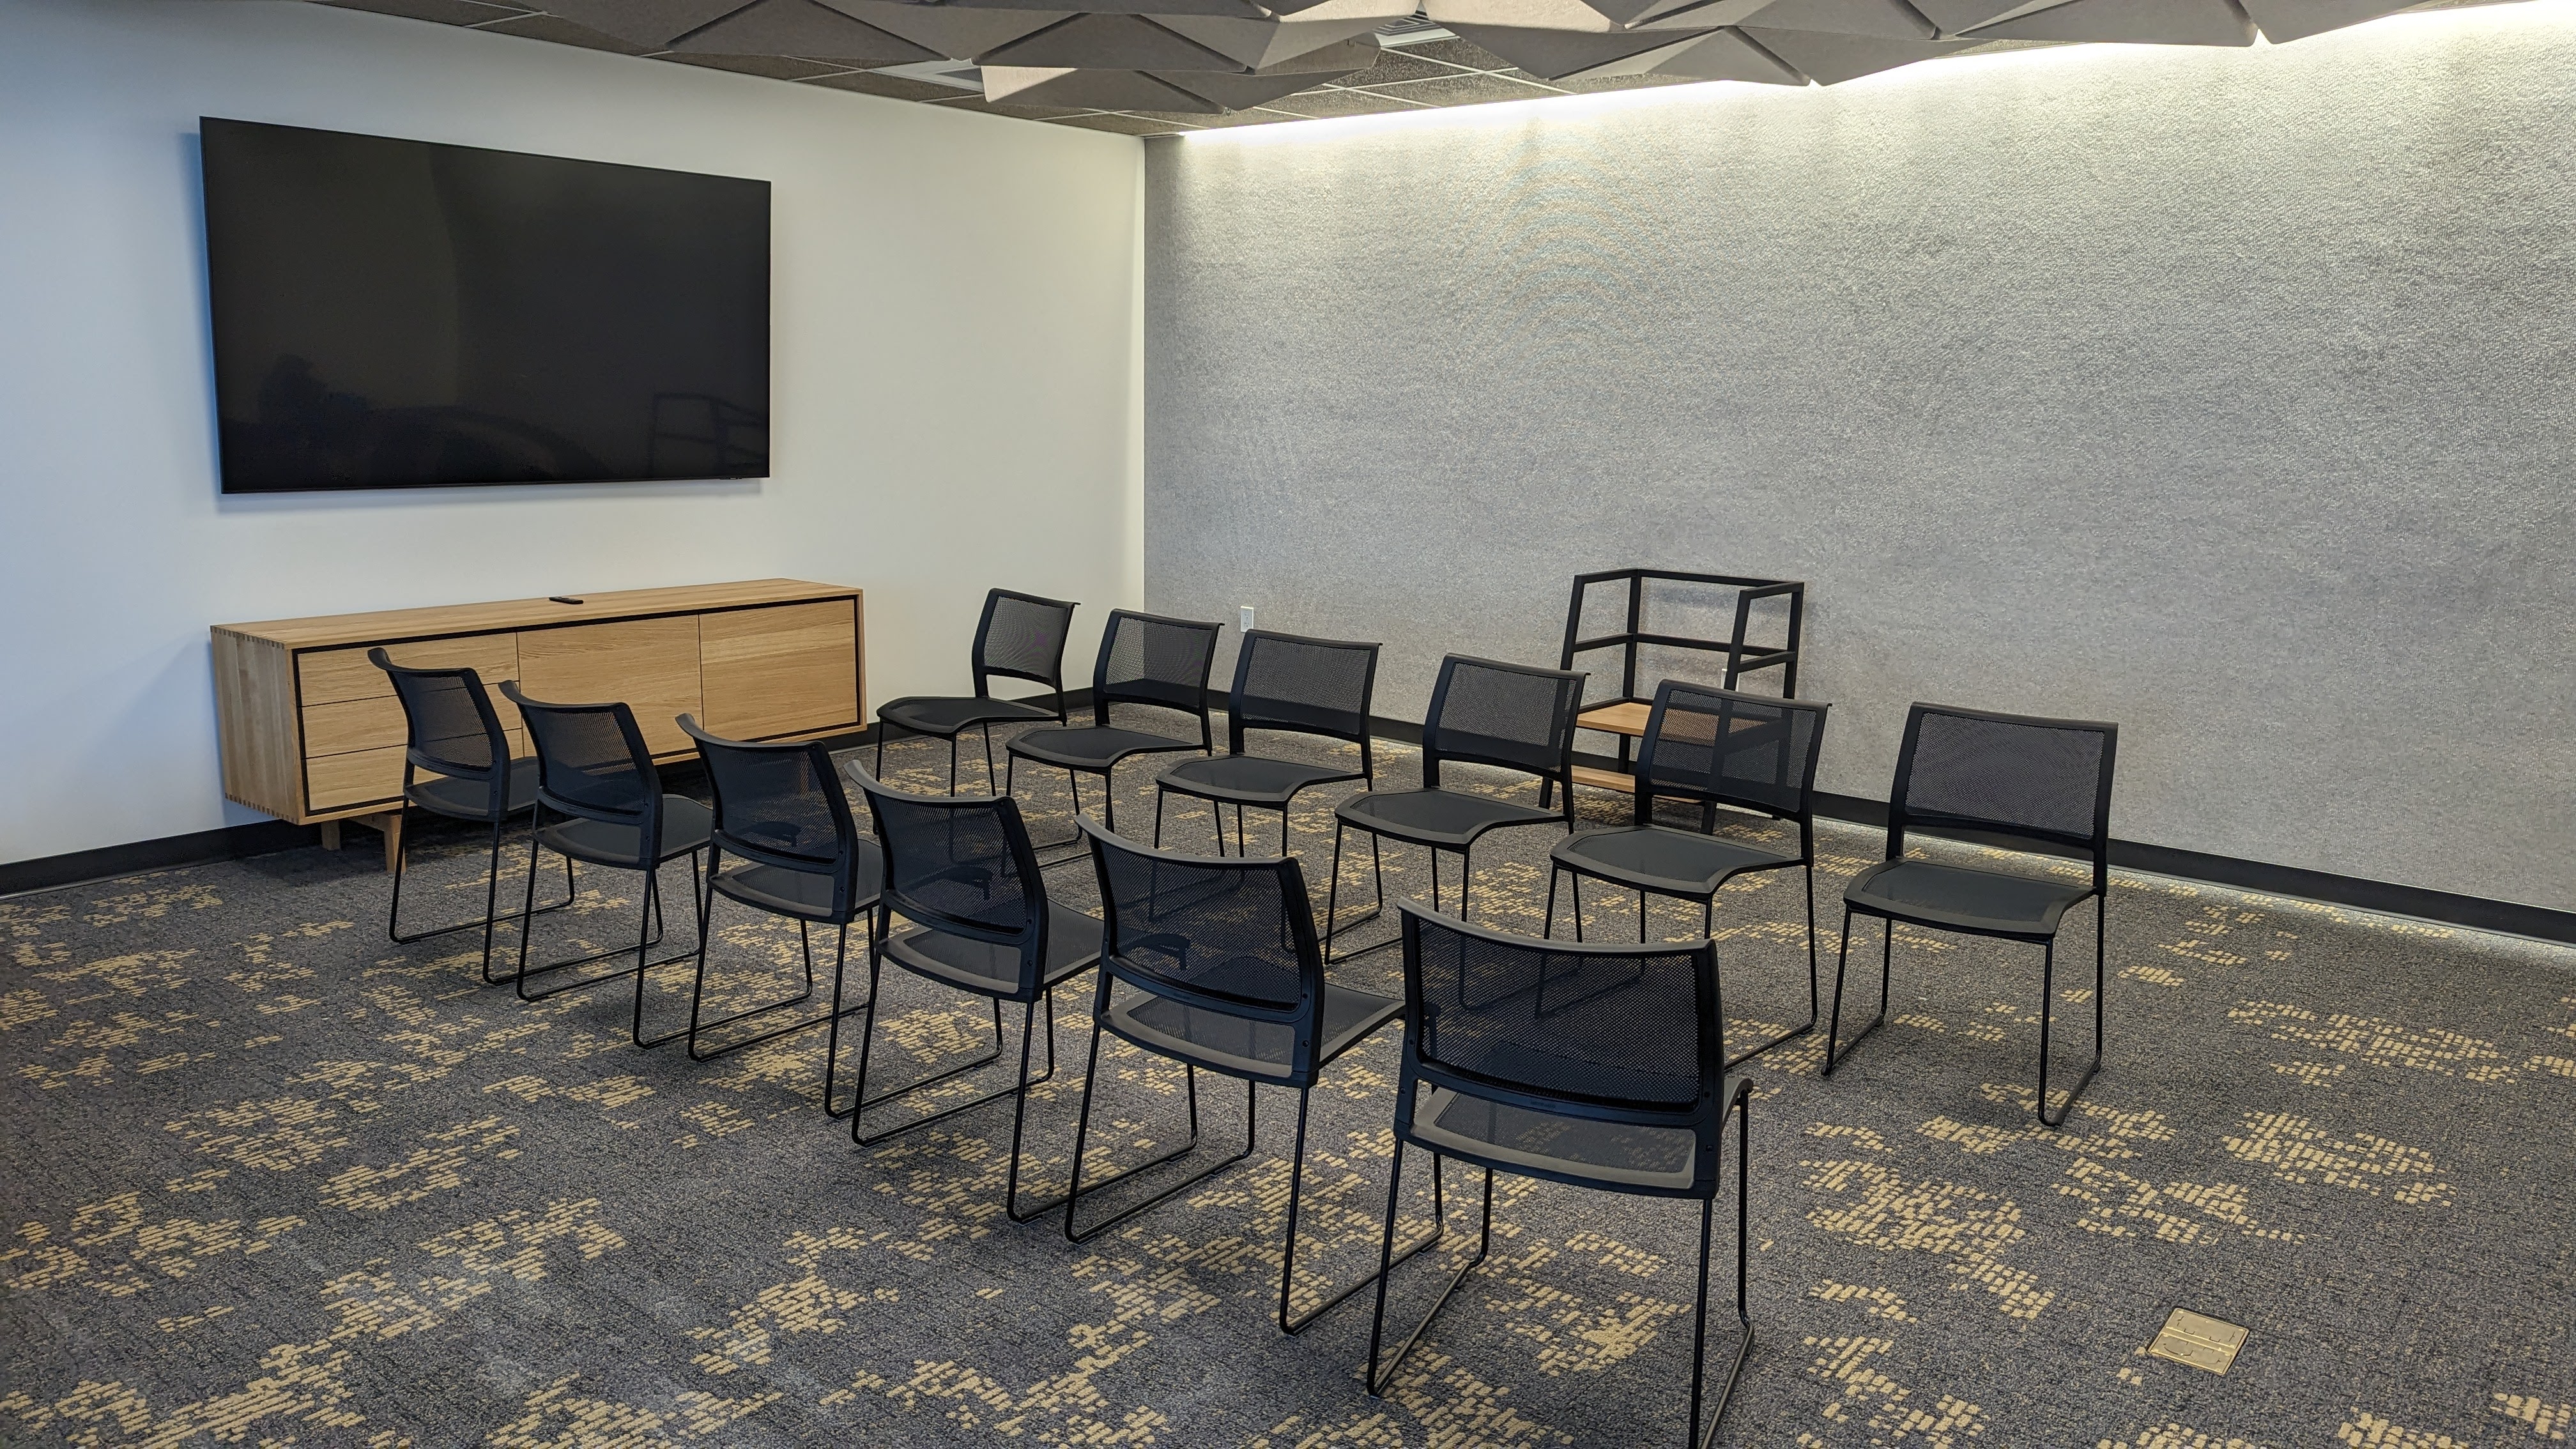 Chairs, TV, and credenza in the conference room.